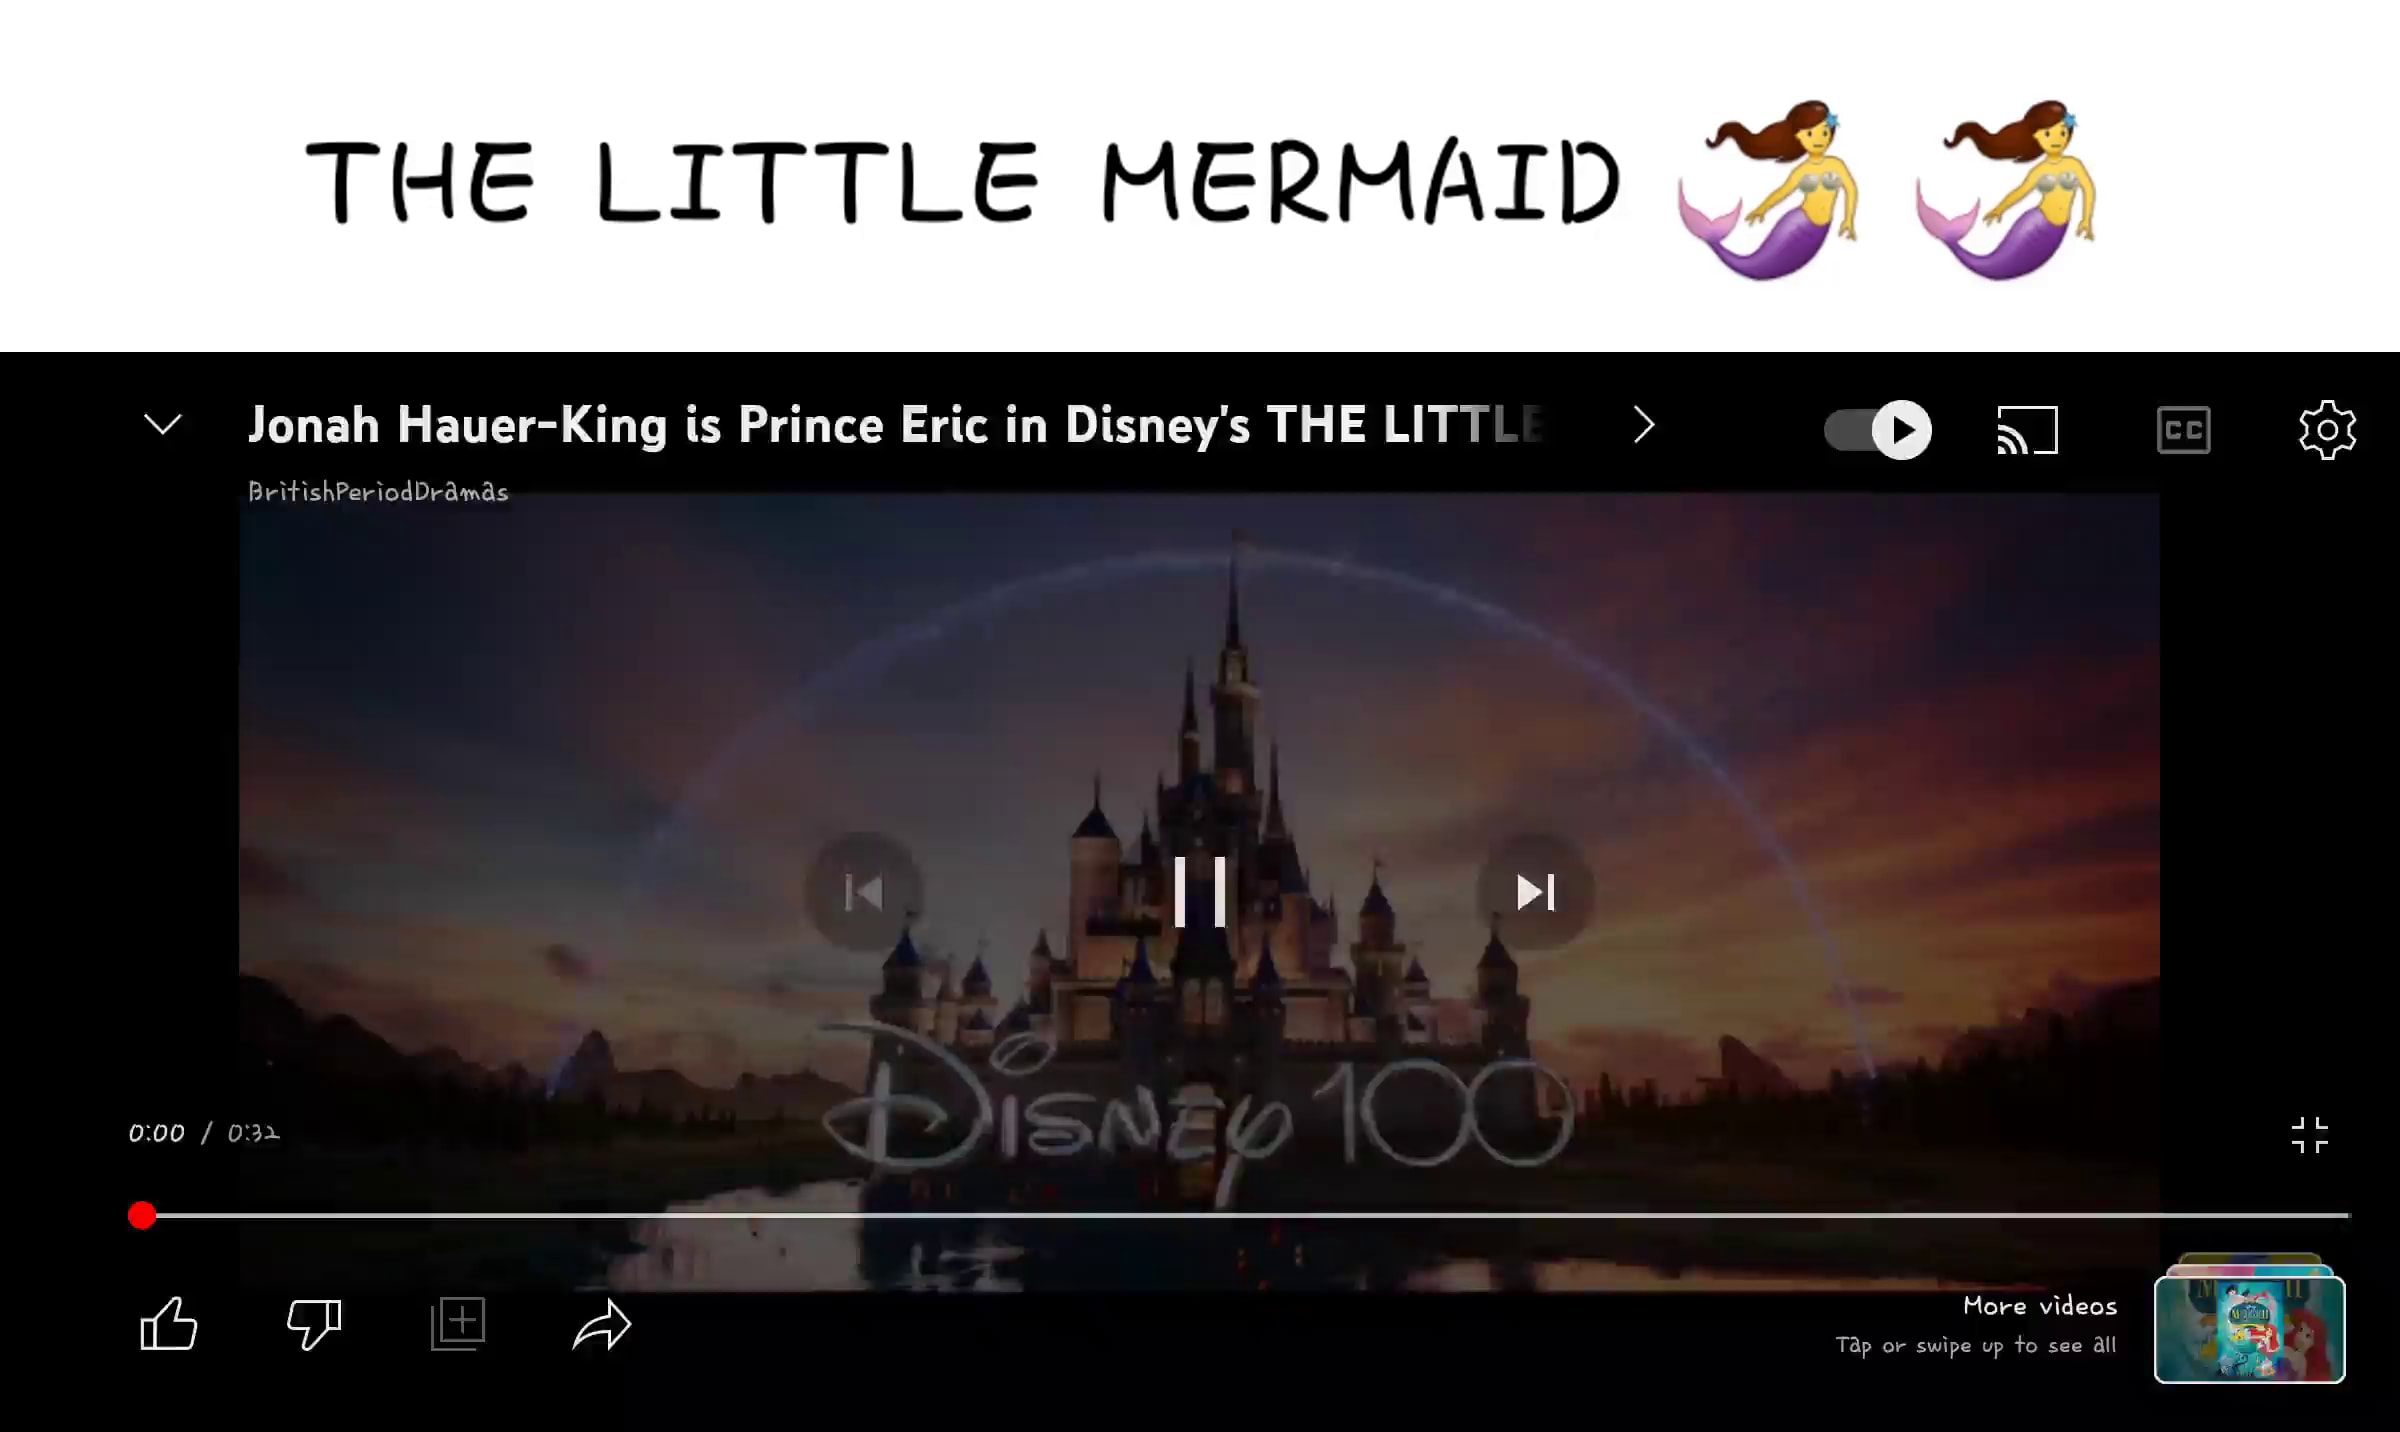 2400px x 1432px - THE LITTLE MERMAID Jonah Hauer-King ts Prince Eric in Disney's THE LITTL >  BritishPeriodDramas A Hove videos [ Tap all - iFunny